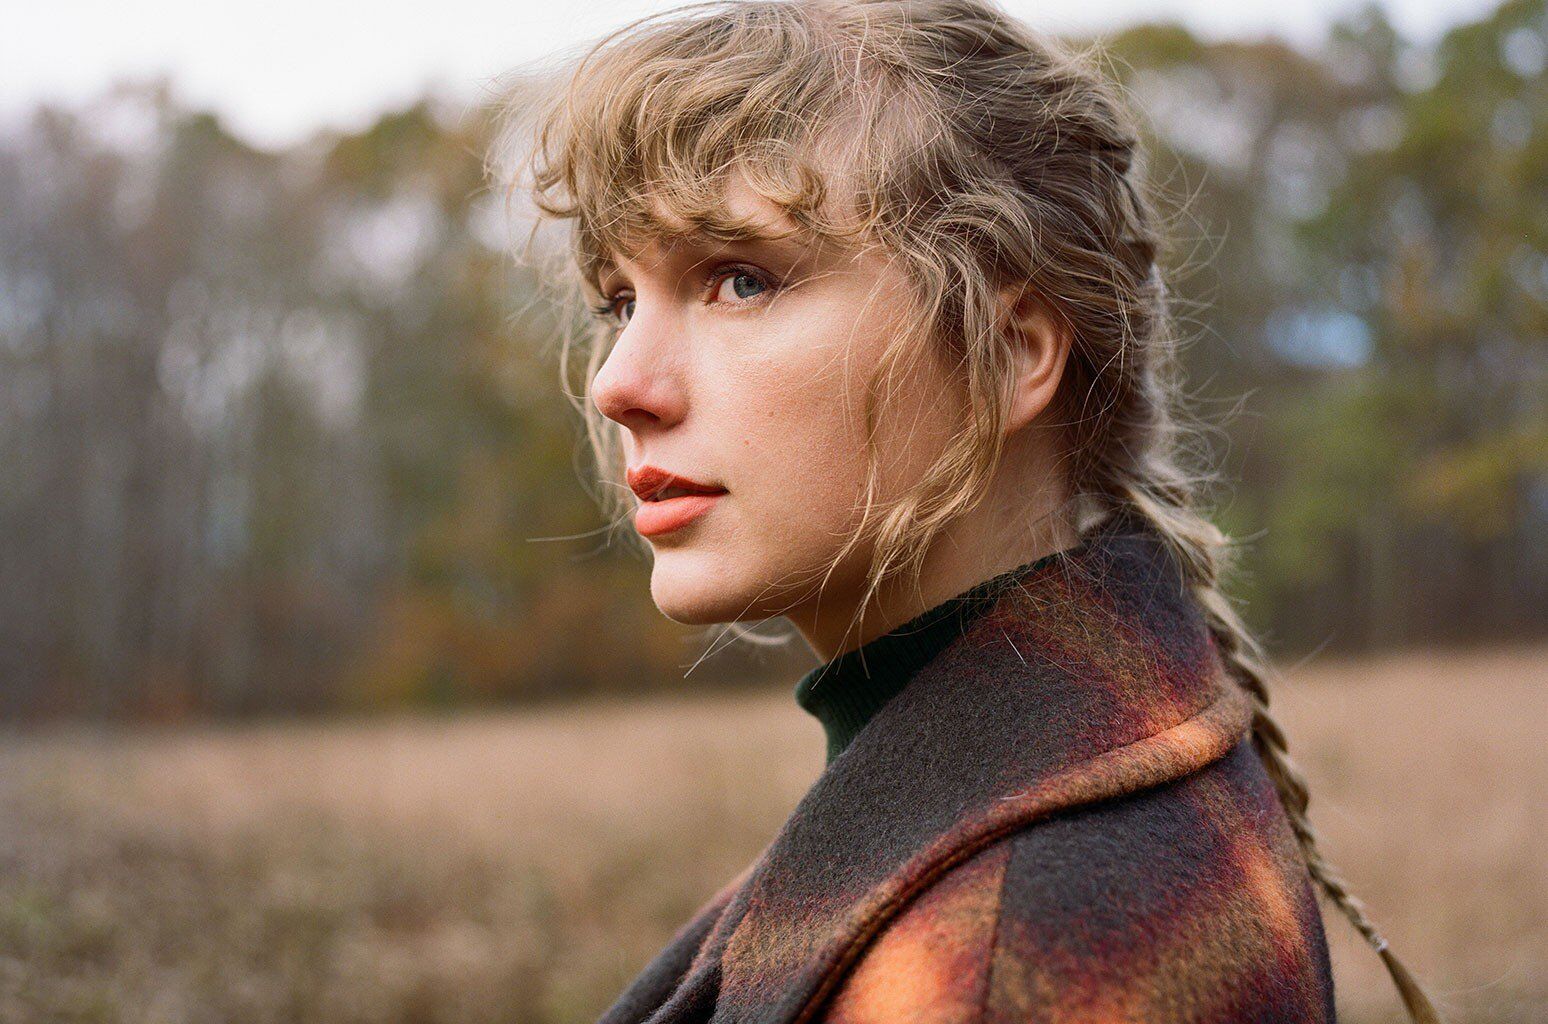 Taylor Swift ‘evermore’ Album Preorder In The Philippines